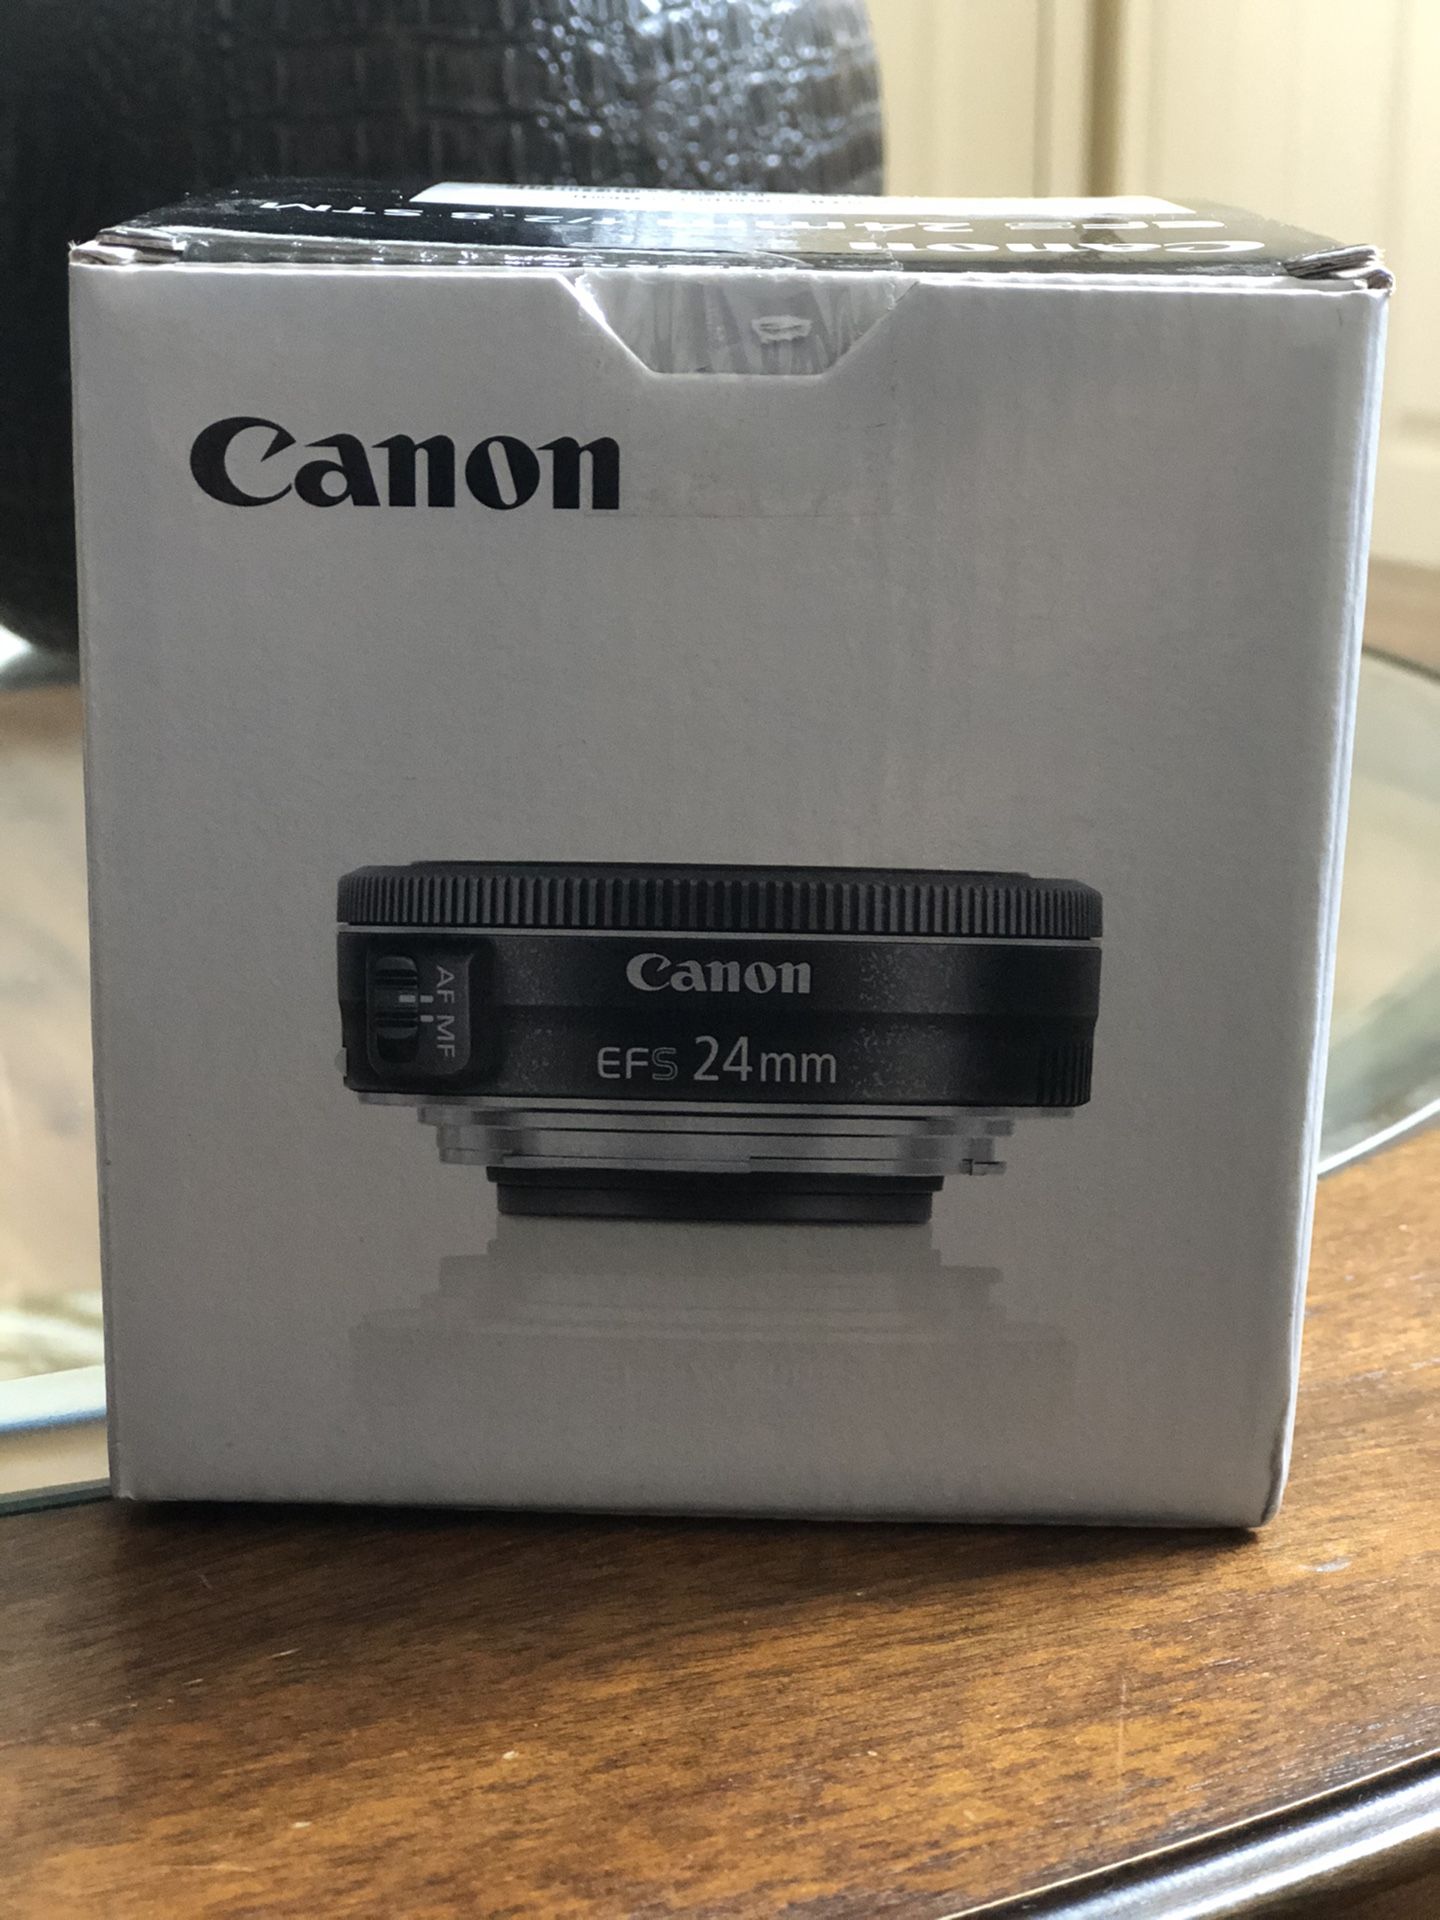 Brand NEW Canon EF-S 24mm f/2.8 STM Wide Angle Lens